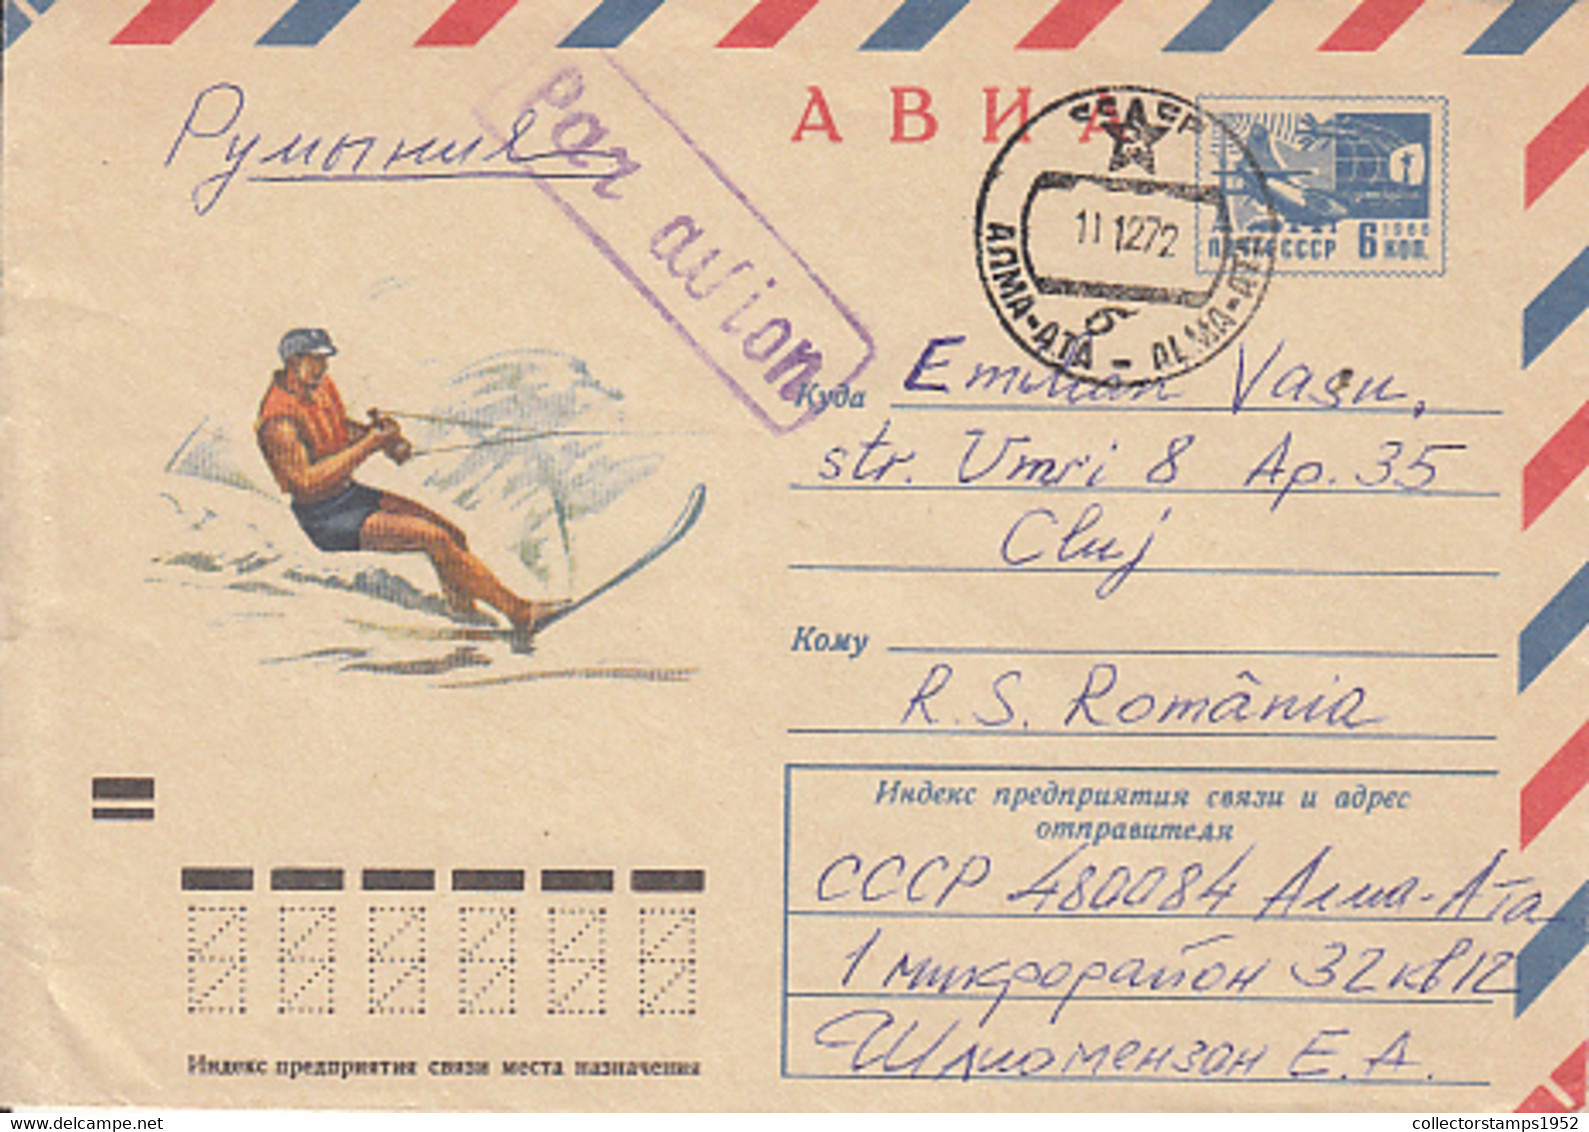 93284- WATER SKIING, SPORTS, COVER STATIONERY, 1972, RUSSIA-USSR - Ski Nautique